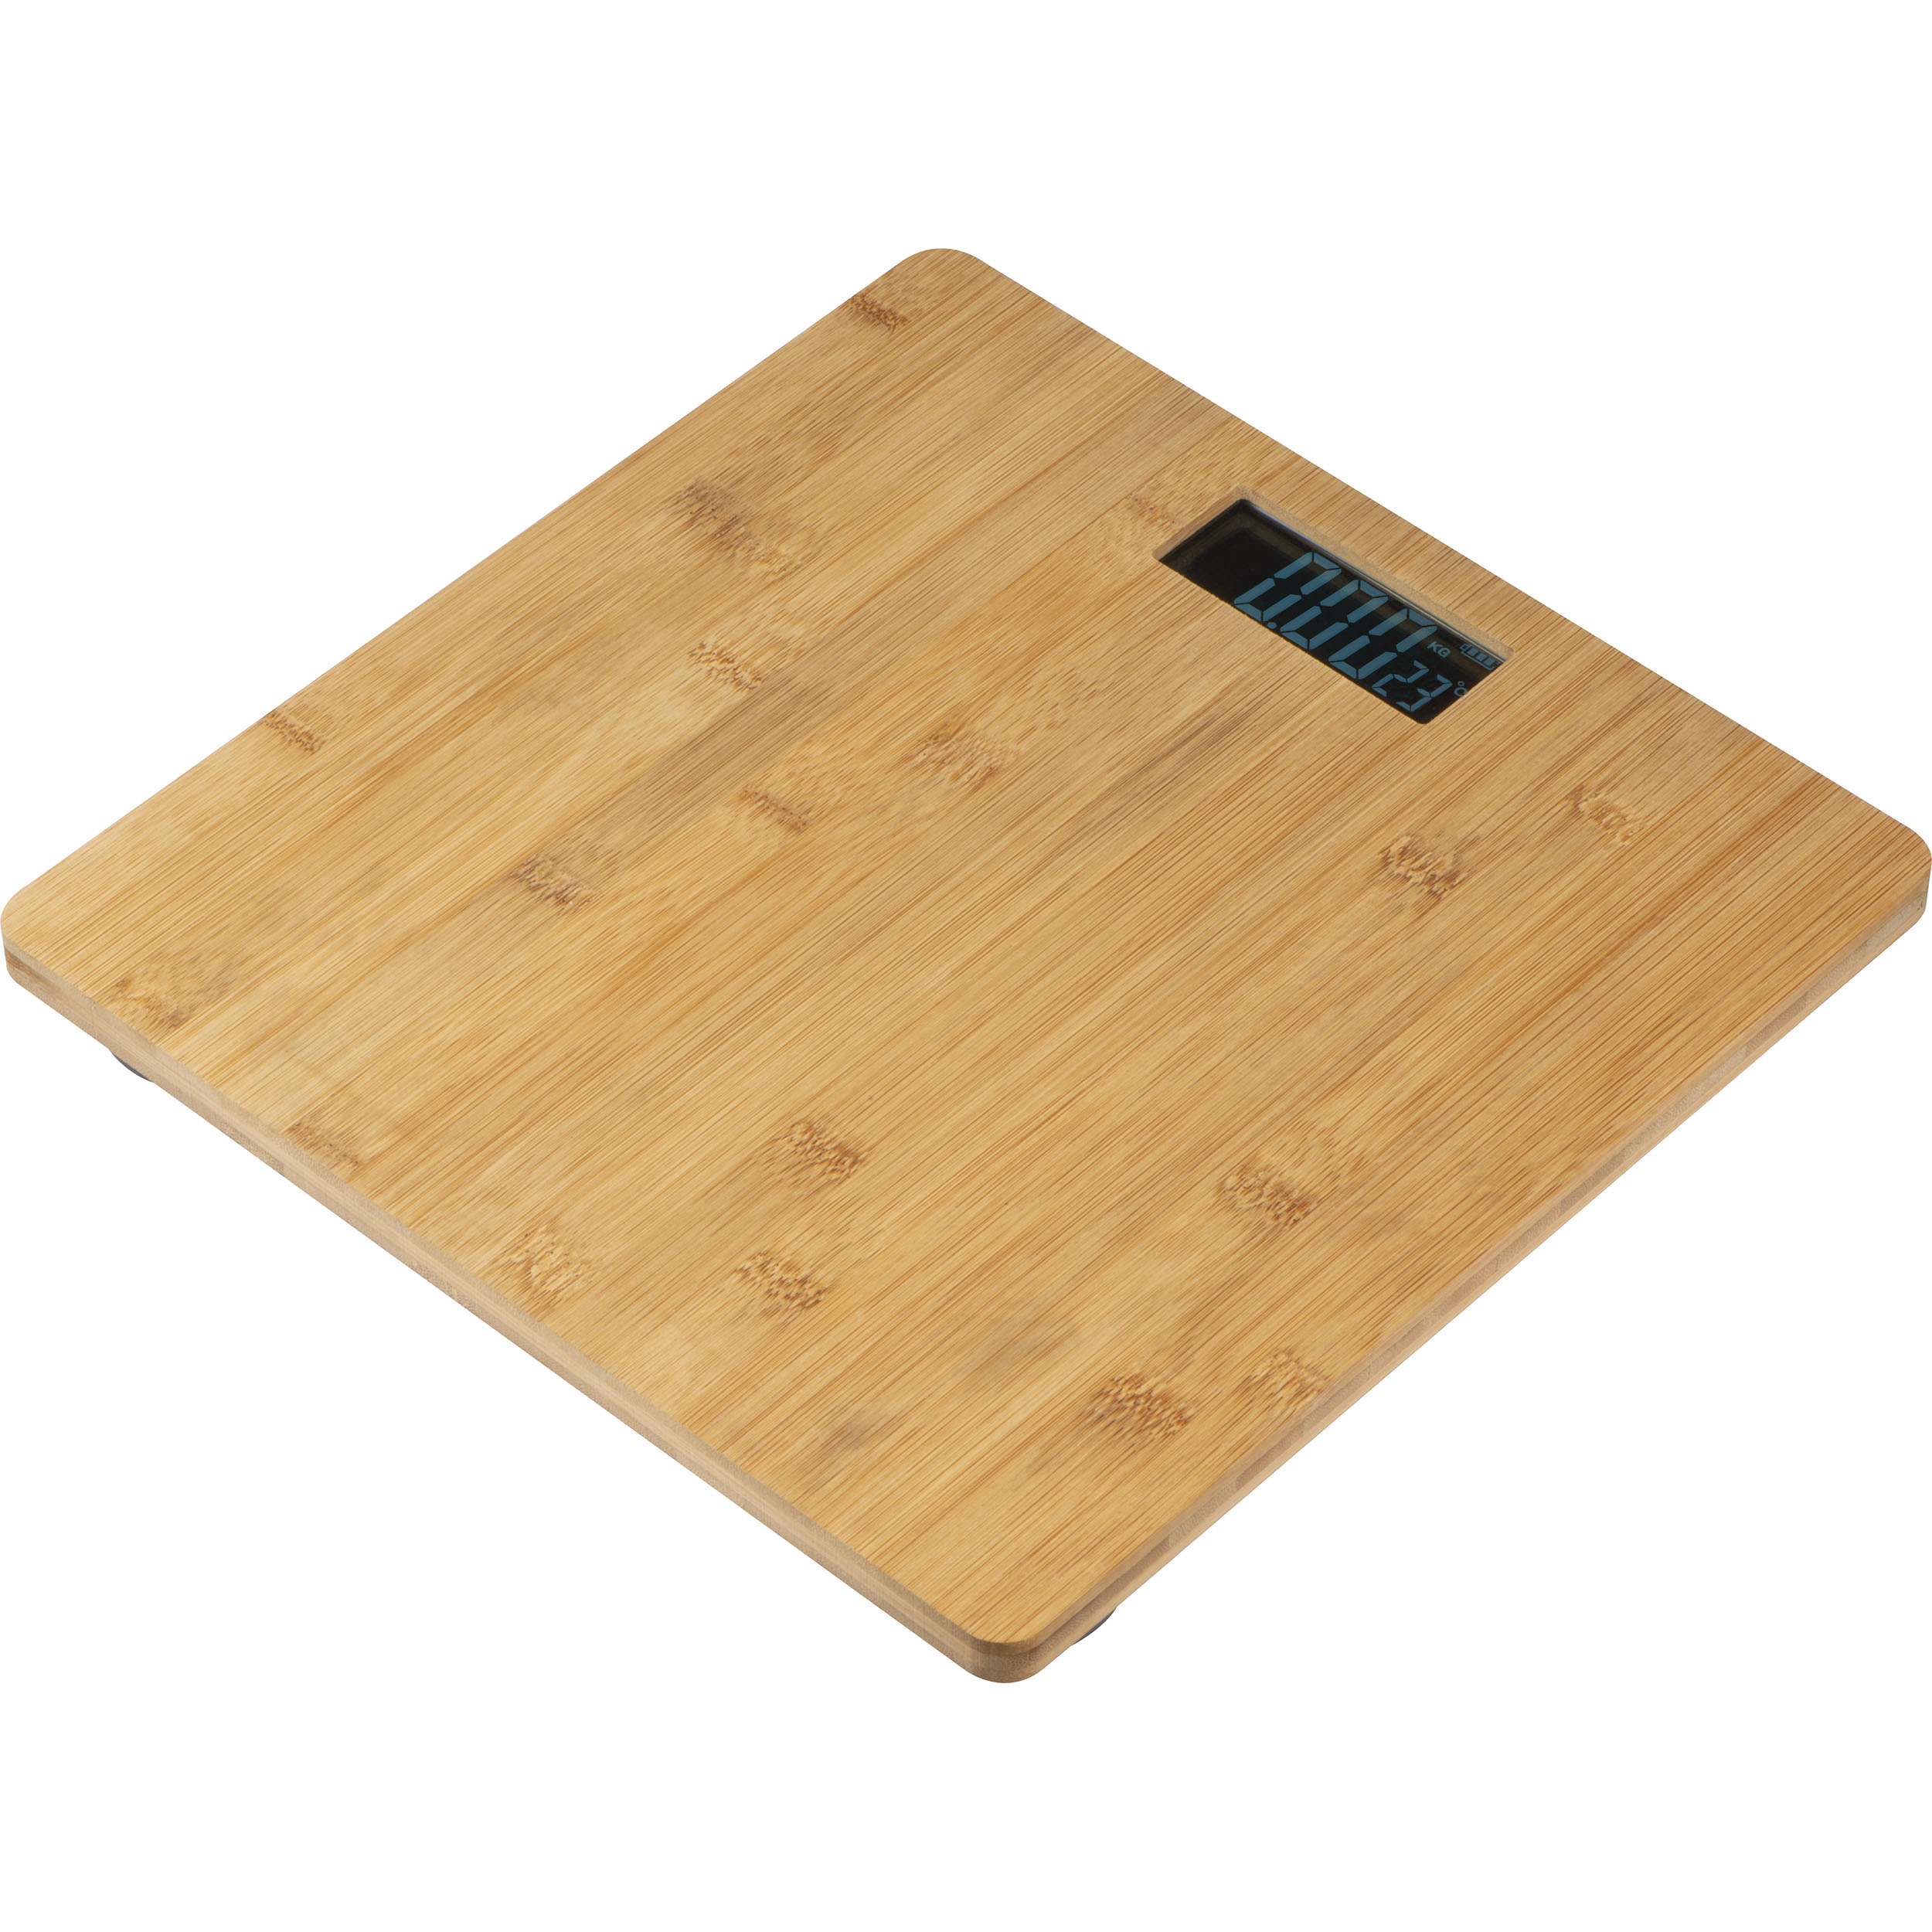 Bamboo-engraved digital scale - Great Barton - Merevale